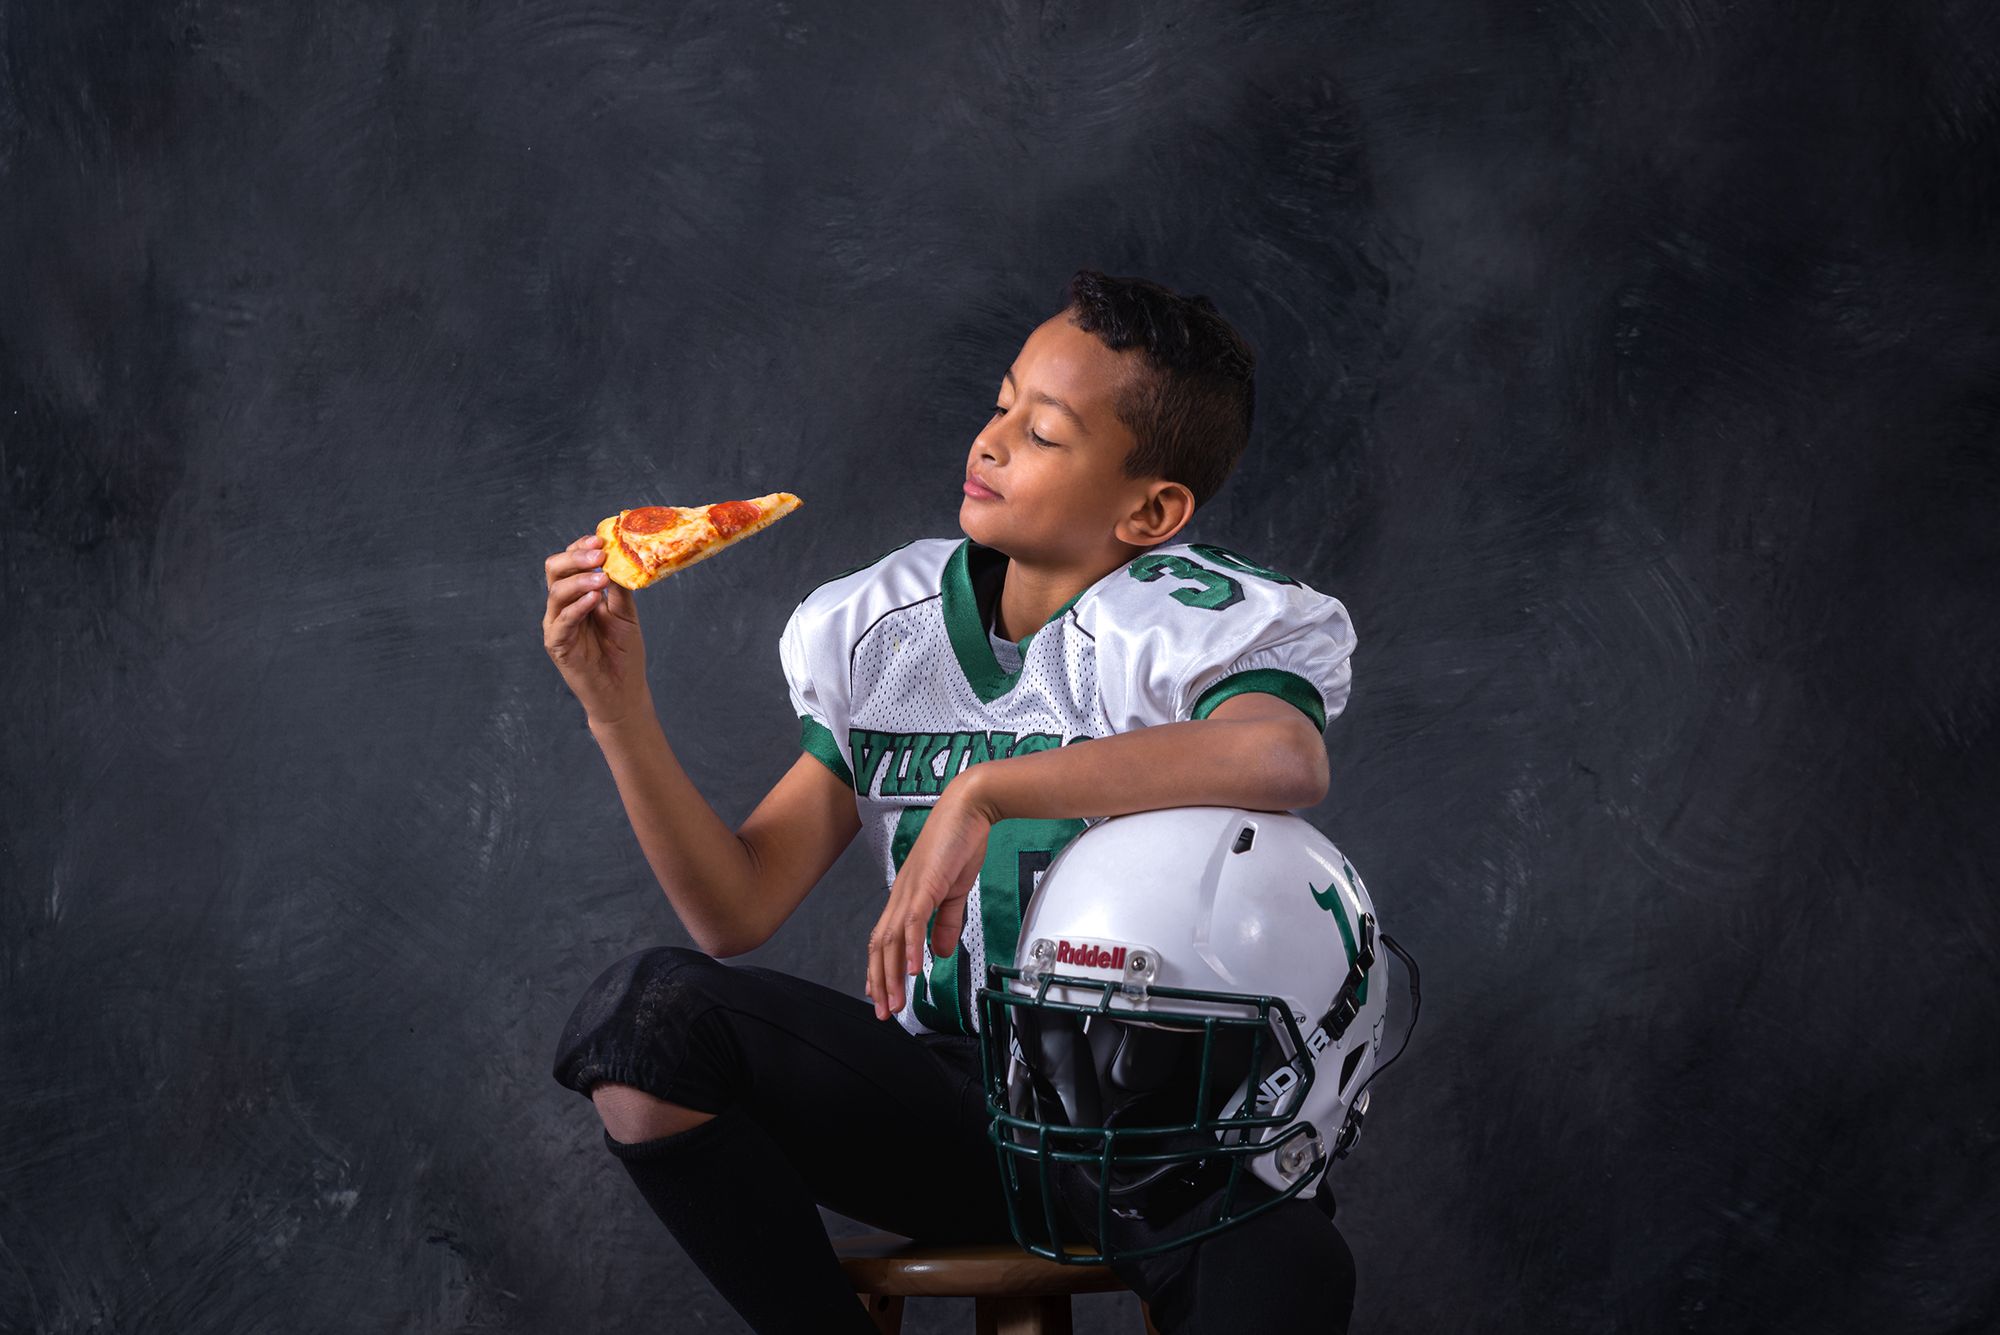 boy in football gear sitting on a chair, ready to bite into a pizza slice